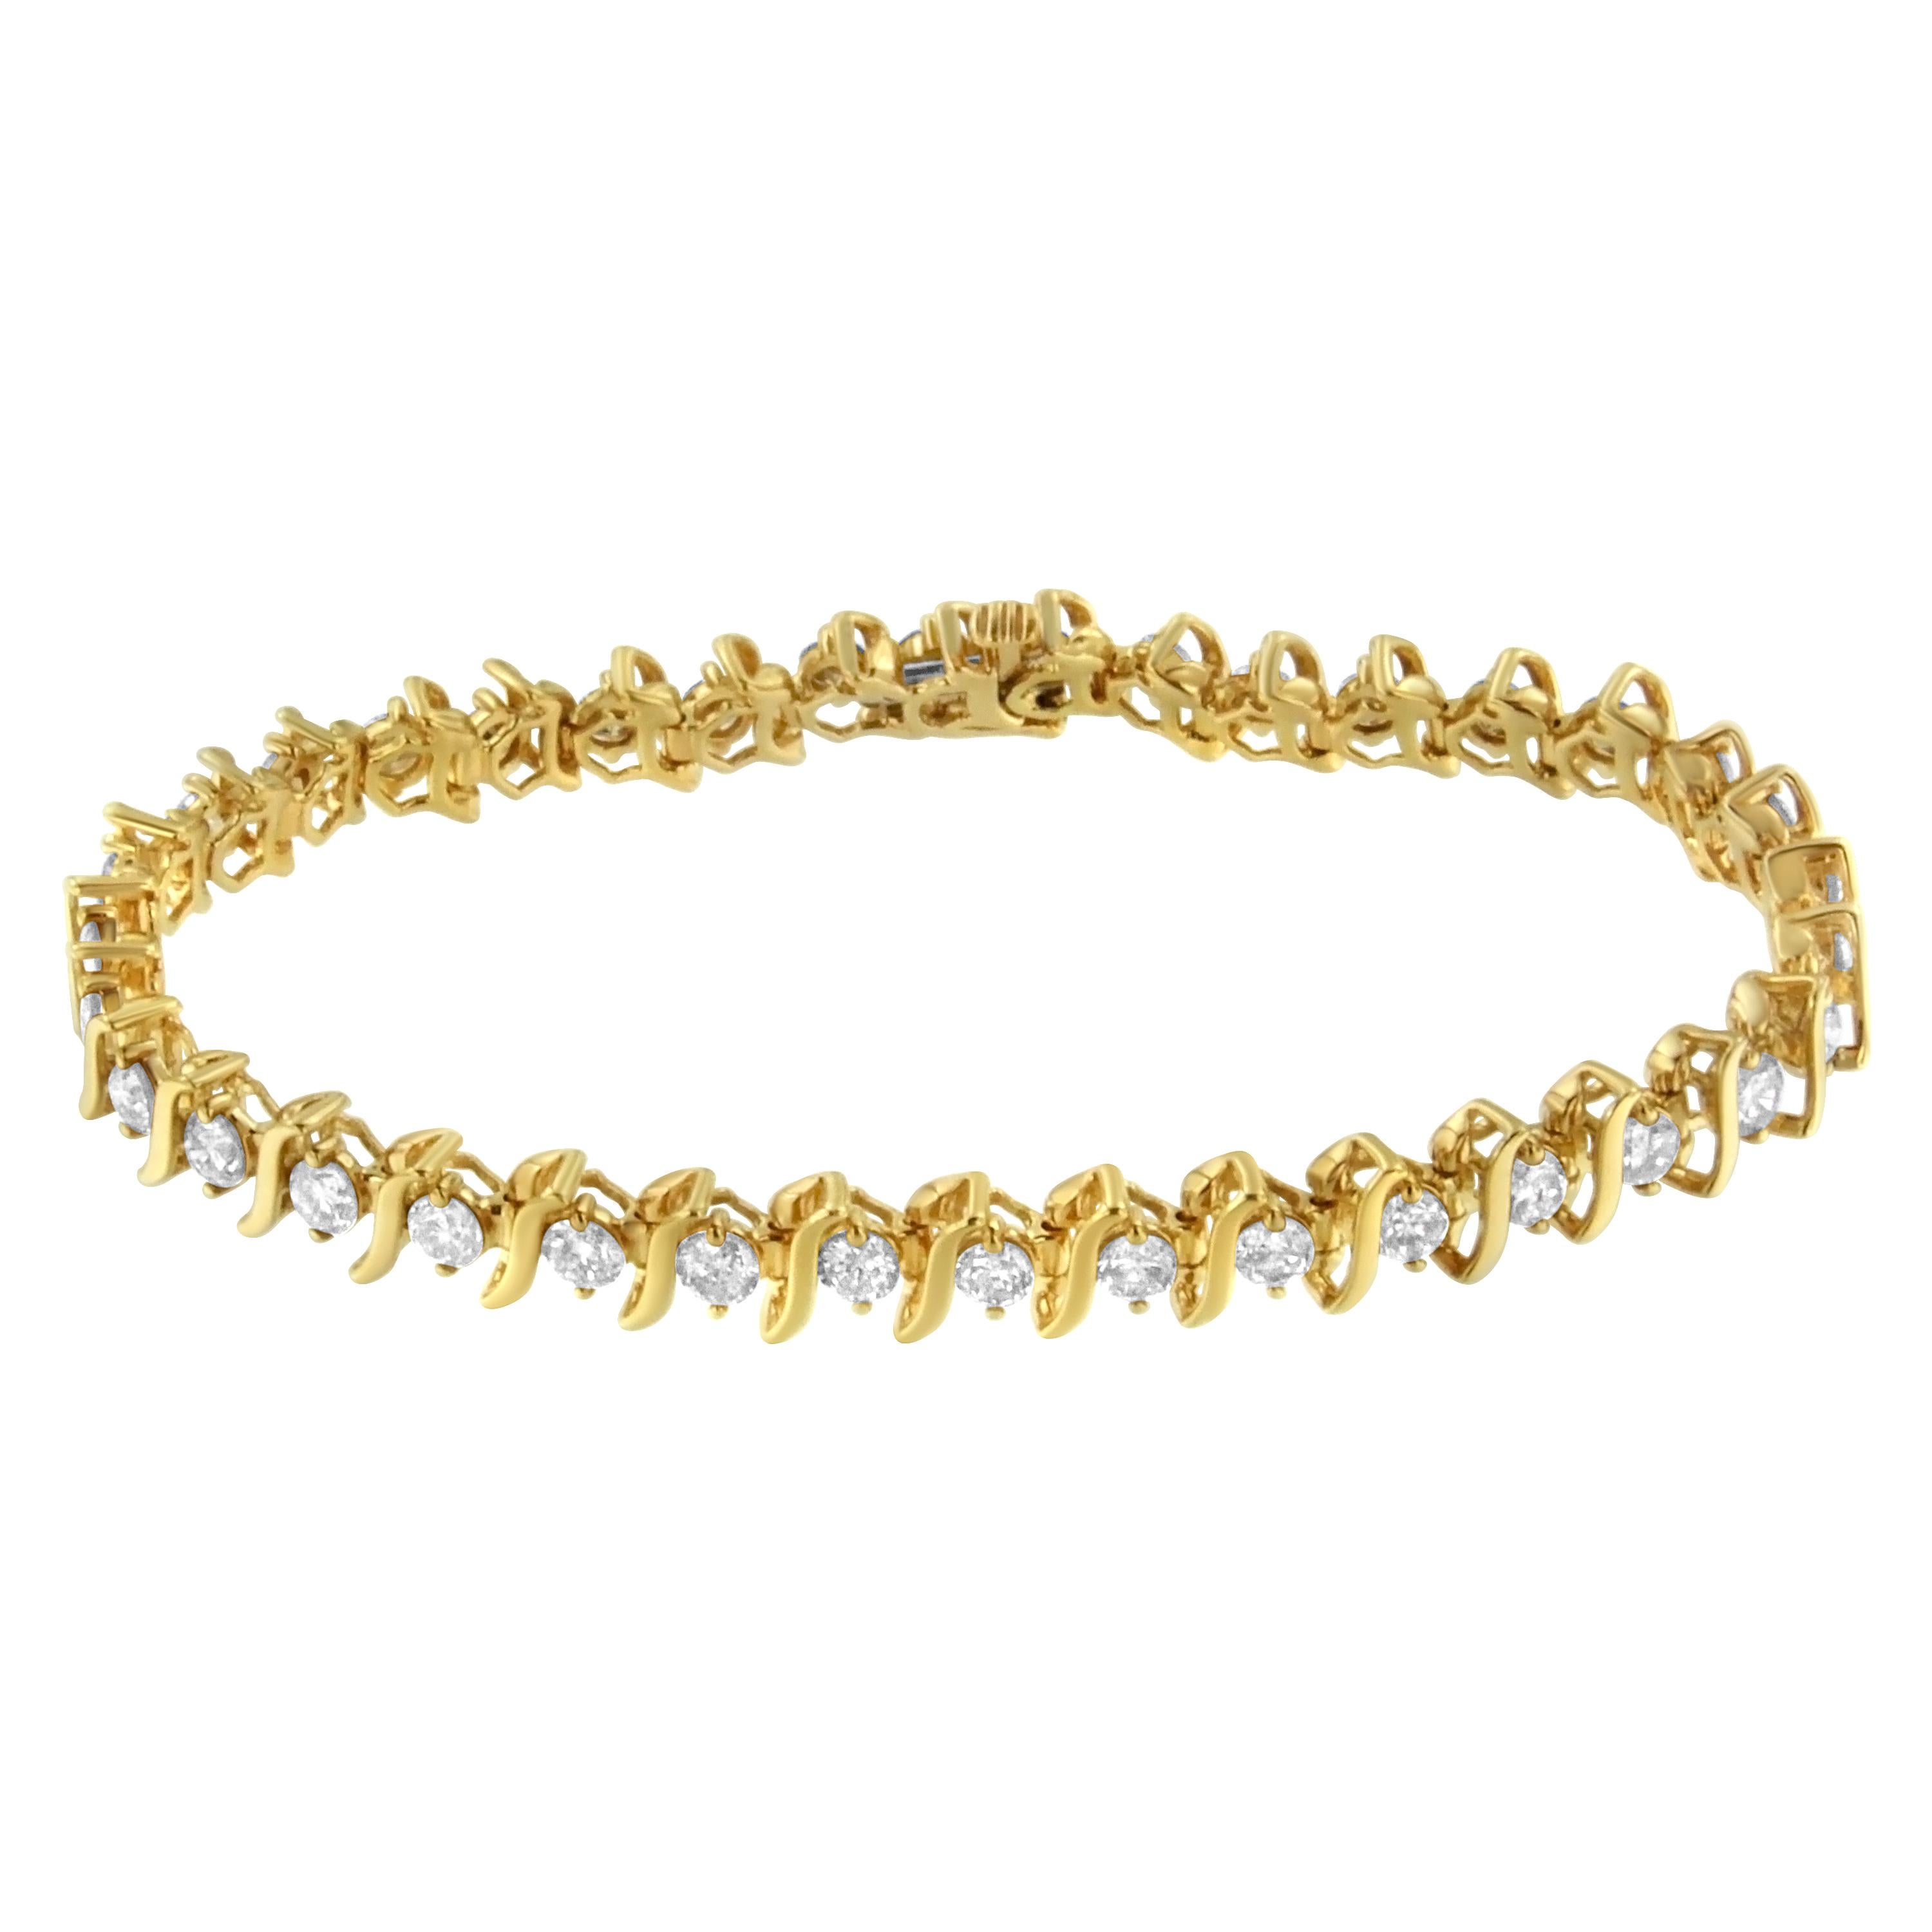 A stunning link bracelet that glistens with round diamonds set within S-shape links to add a timeless touch to this design. Crafted in 2 micron 14 karat yellow gold plated sterling silver, this bracelet elegantly puts the finishing touch on an